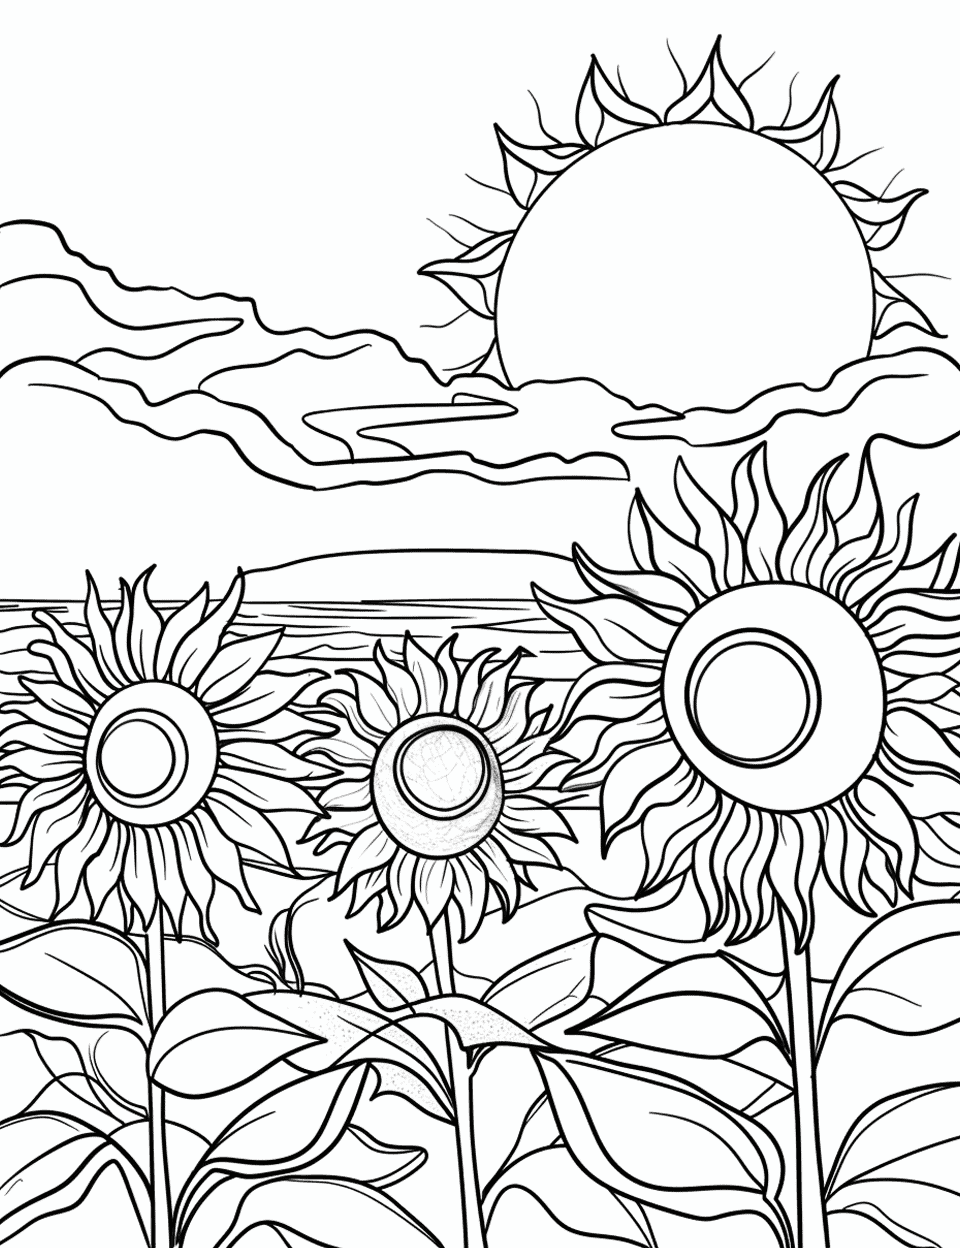 Sunflower Field at Dawn Sun Coloring Page - A field of sunflowers facing the rising sun at dawn.